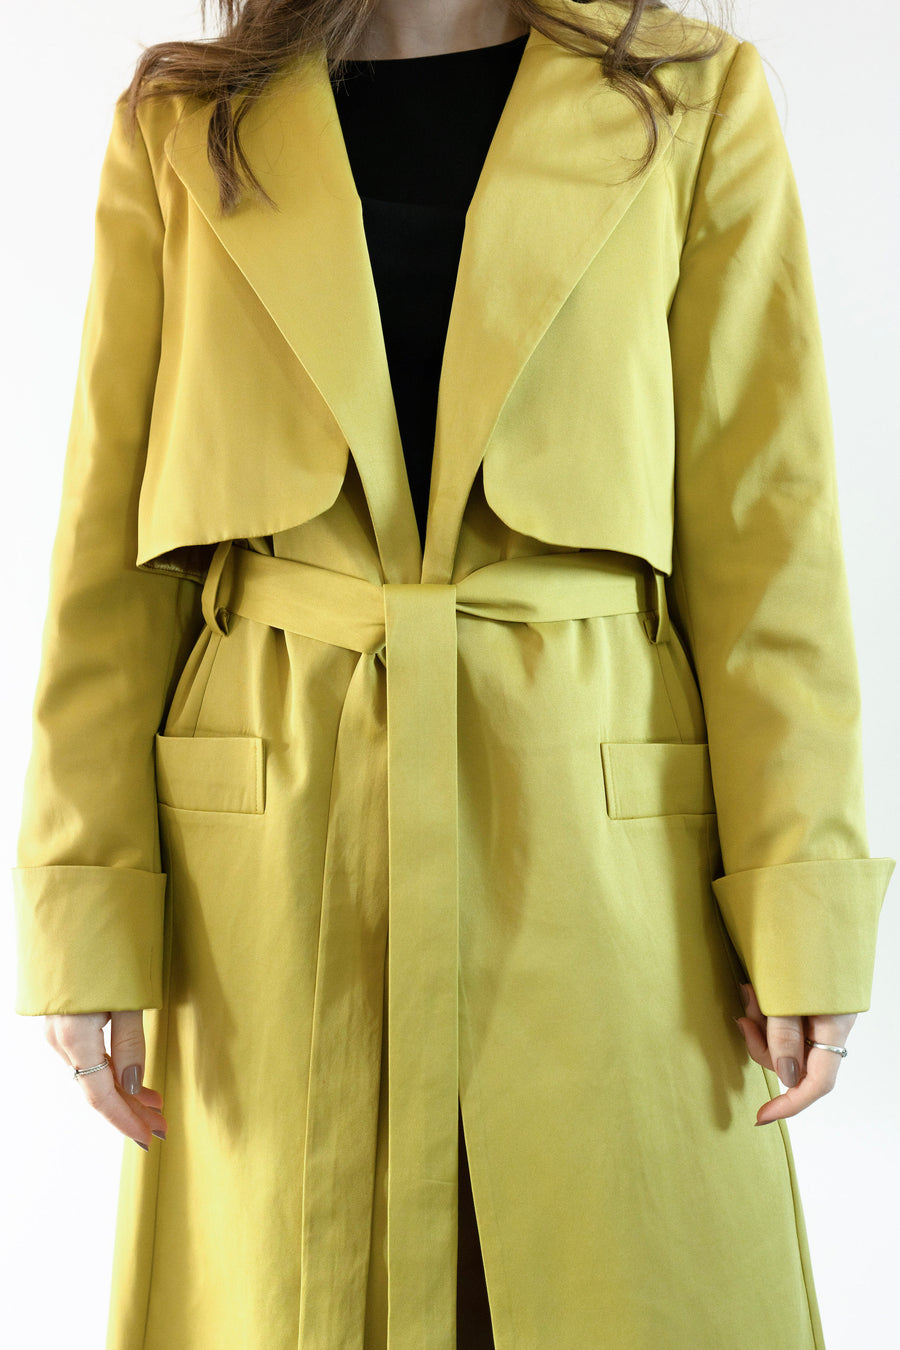 THE TRENCH COAT